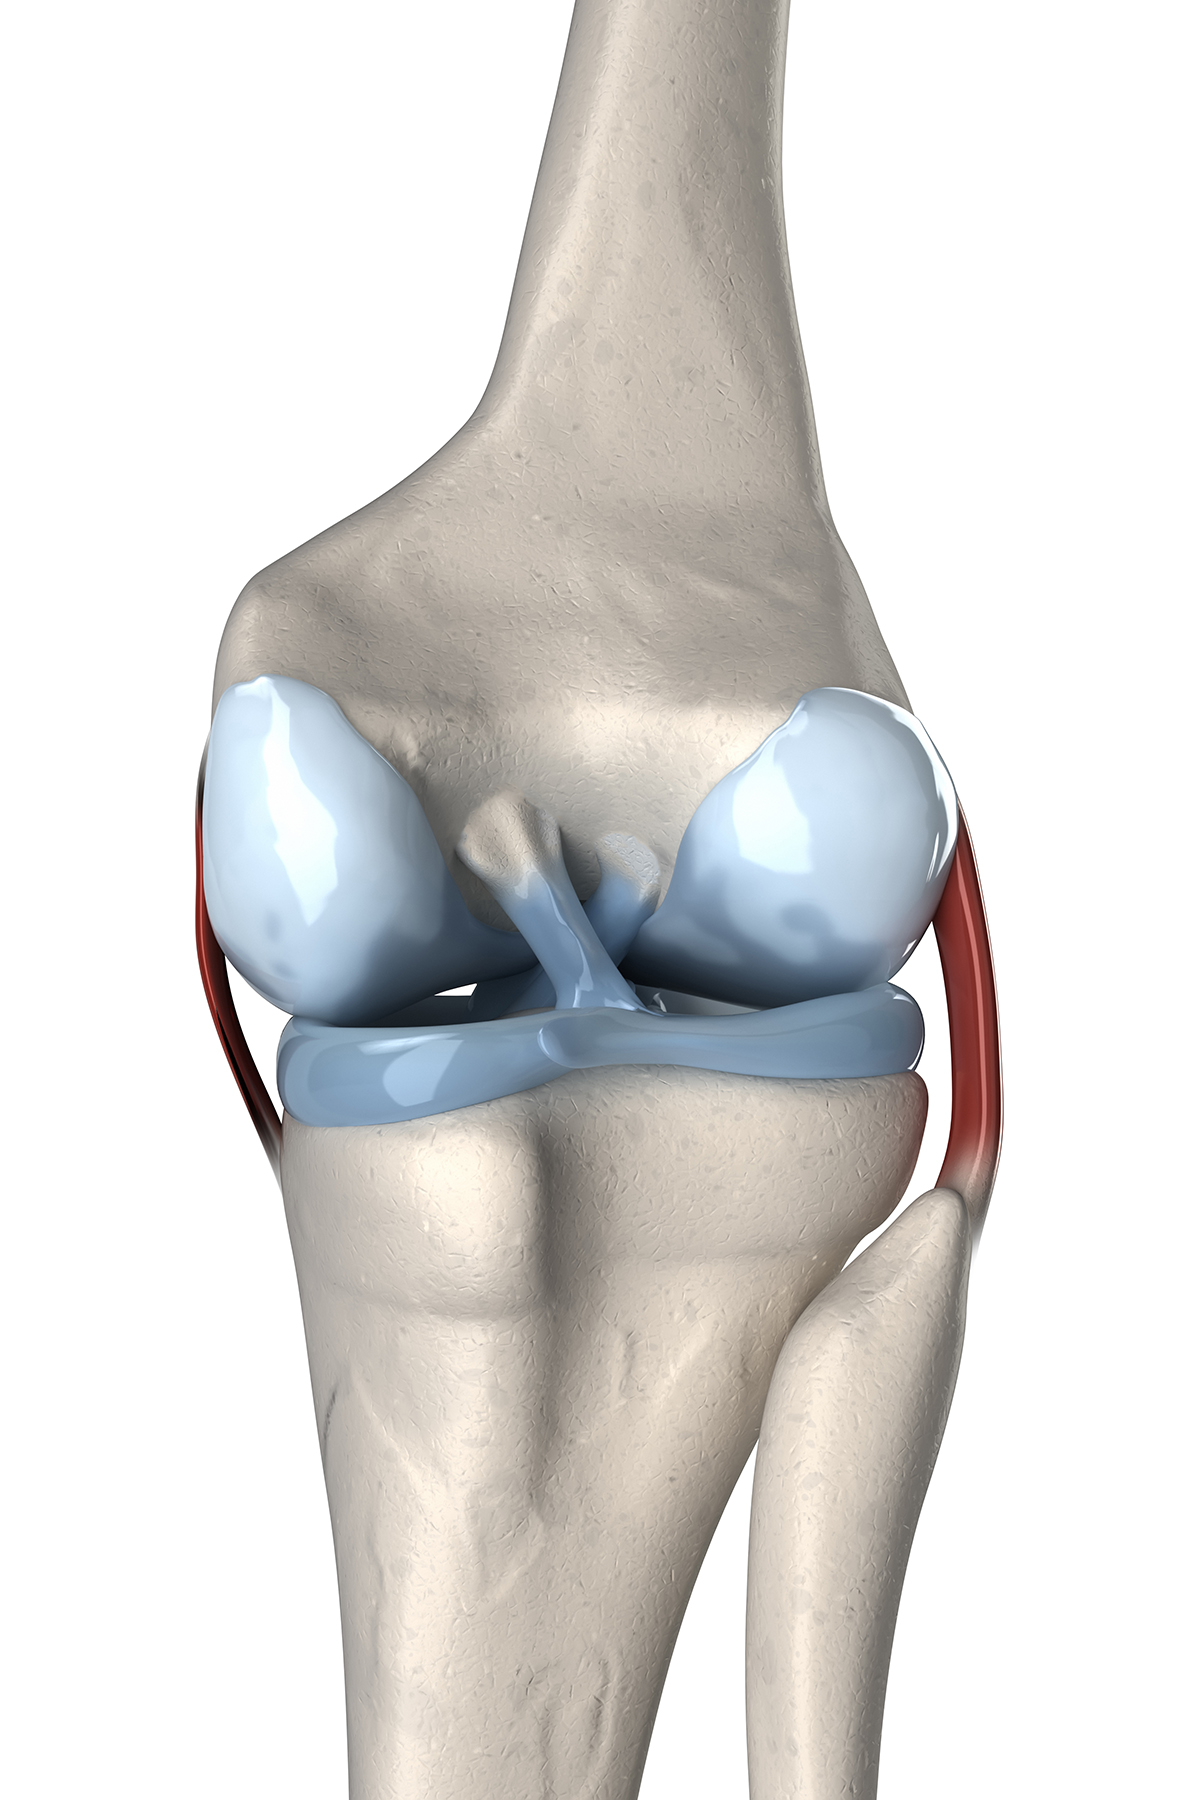 Knee joint illustration. The thigh bone (top bone) is connected to the shin bone (larger of the two bottom bones) by ligaments. One of these, the anterior cruciate ligament (diagonal strip between the rounded ends of the thigh bone) is particularly vulner